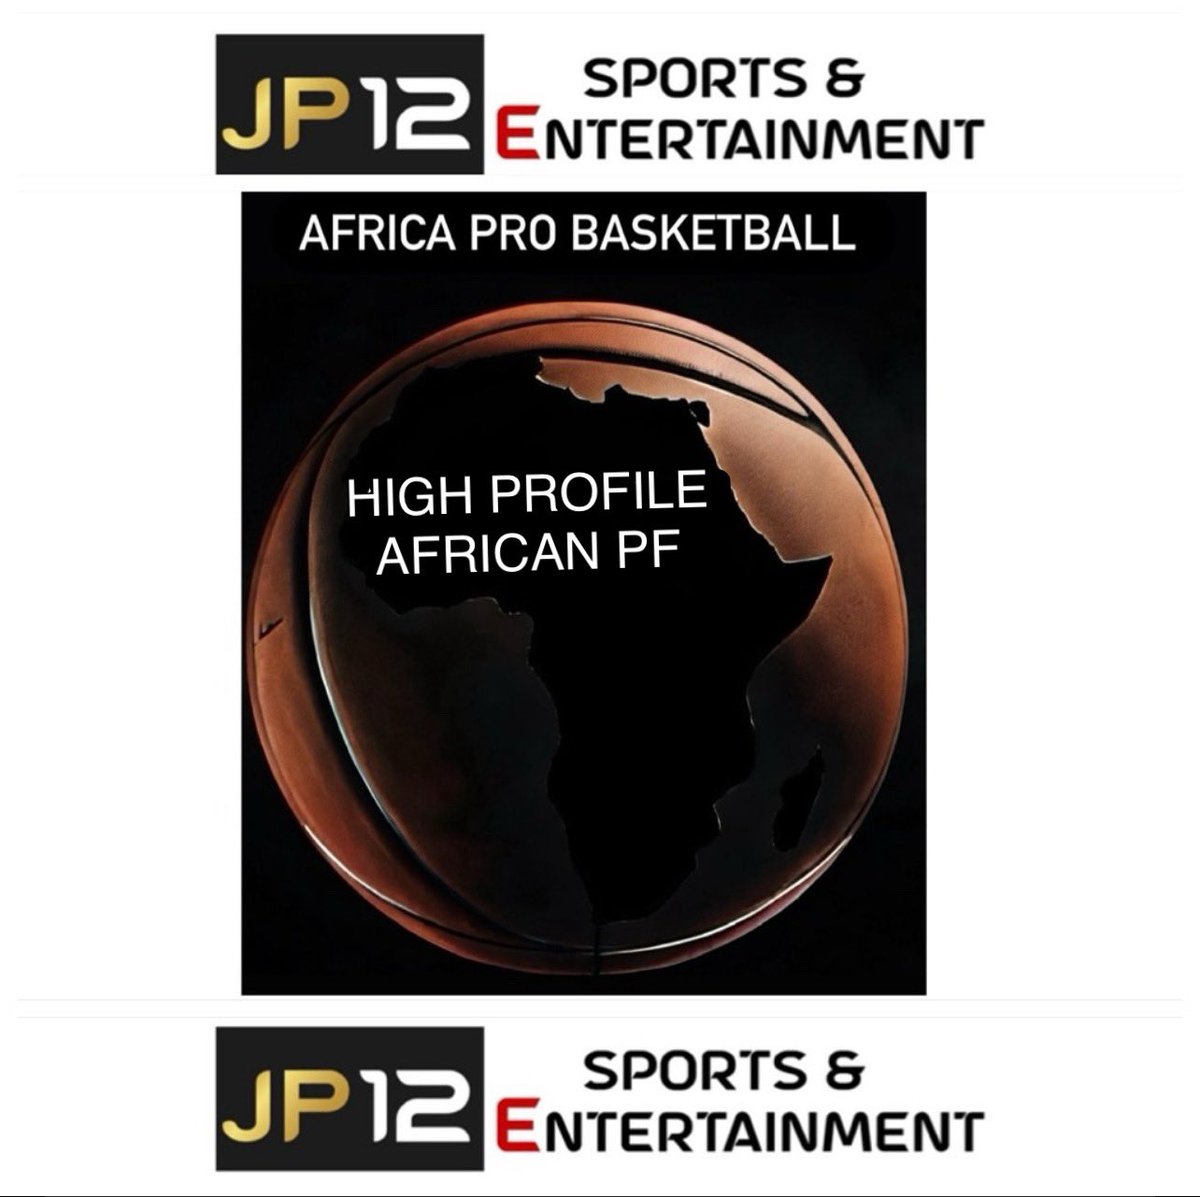 🚨 URGENT Looking for Elite High Profile Power Forward Position with 🌍 African Passport📌 for #TheBAL Season 4. Very Good Defender of Multiple Positions, Must Be Good From Three and an Athletic Slasher To Basket. *MUST HAVE GREAT RESUME* - BAL Team 🌍 - 3 Months Contract